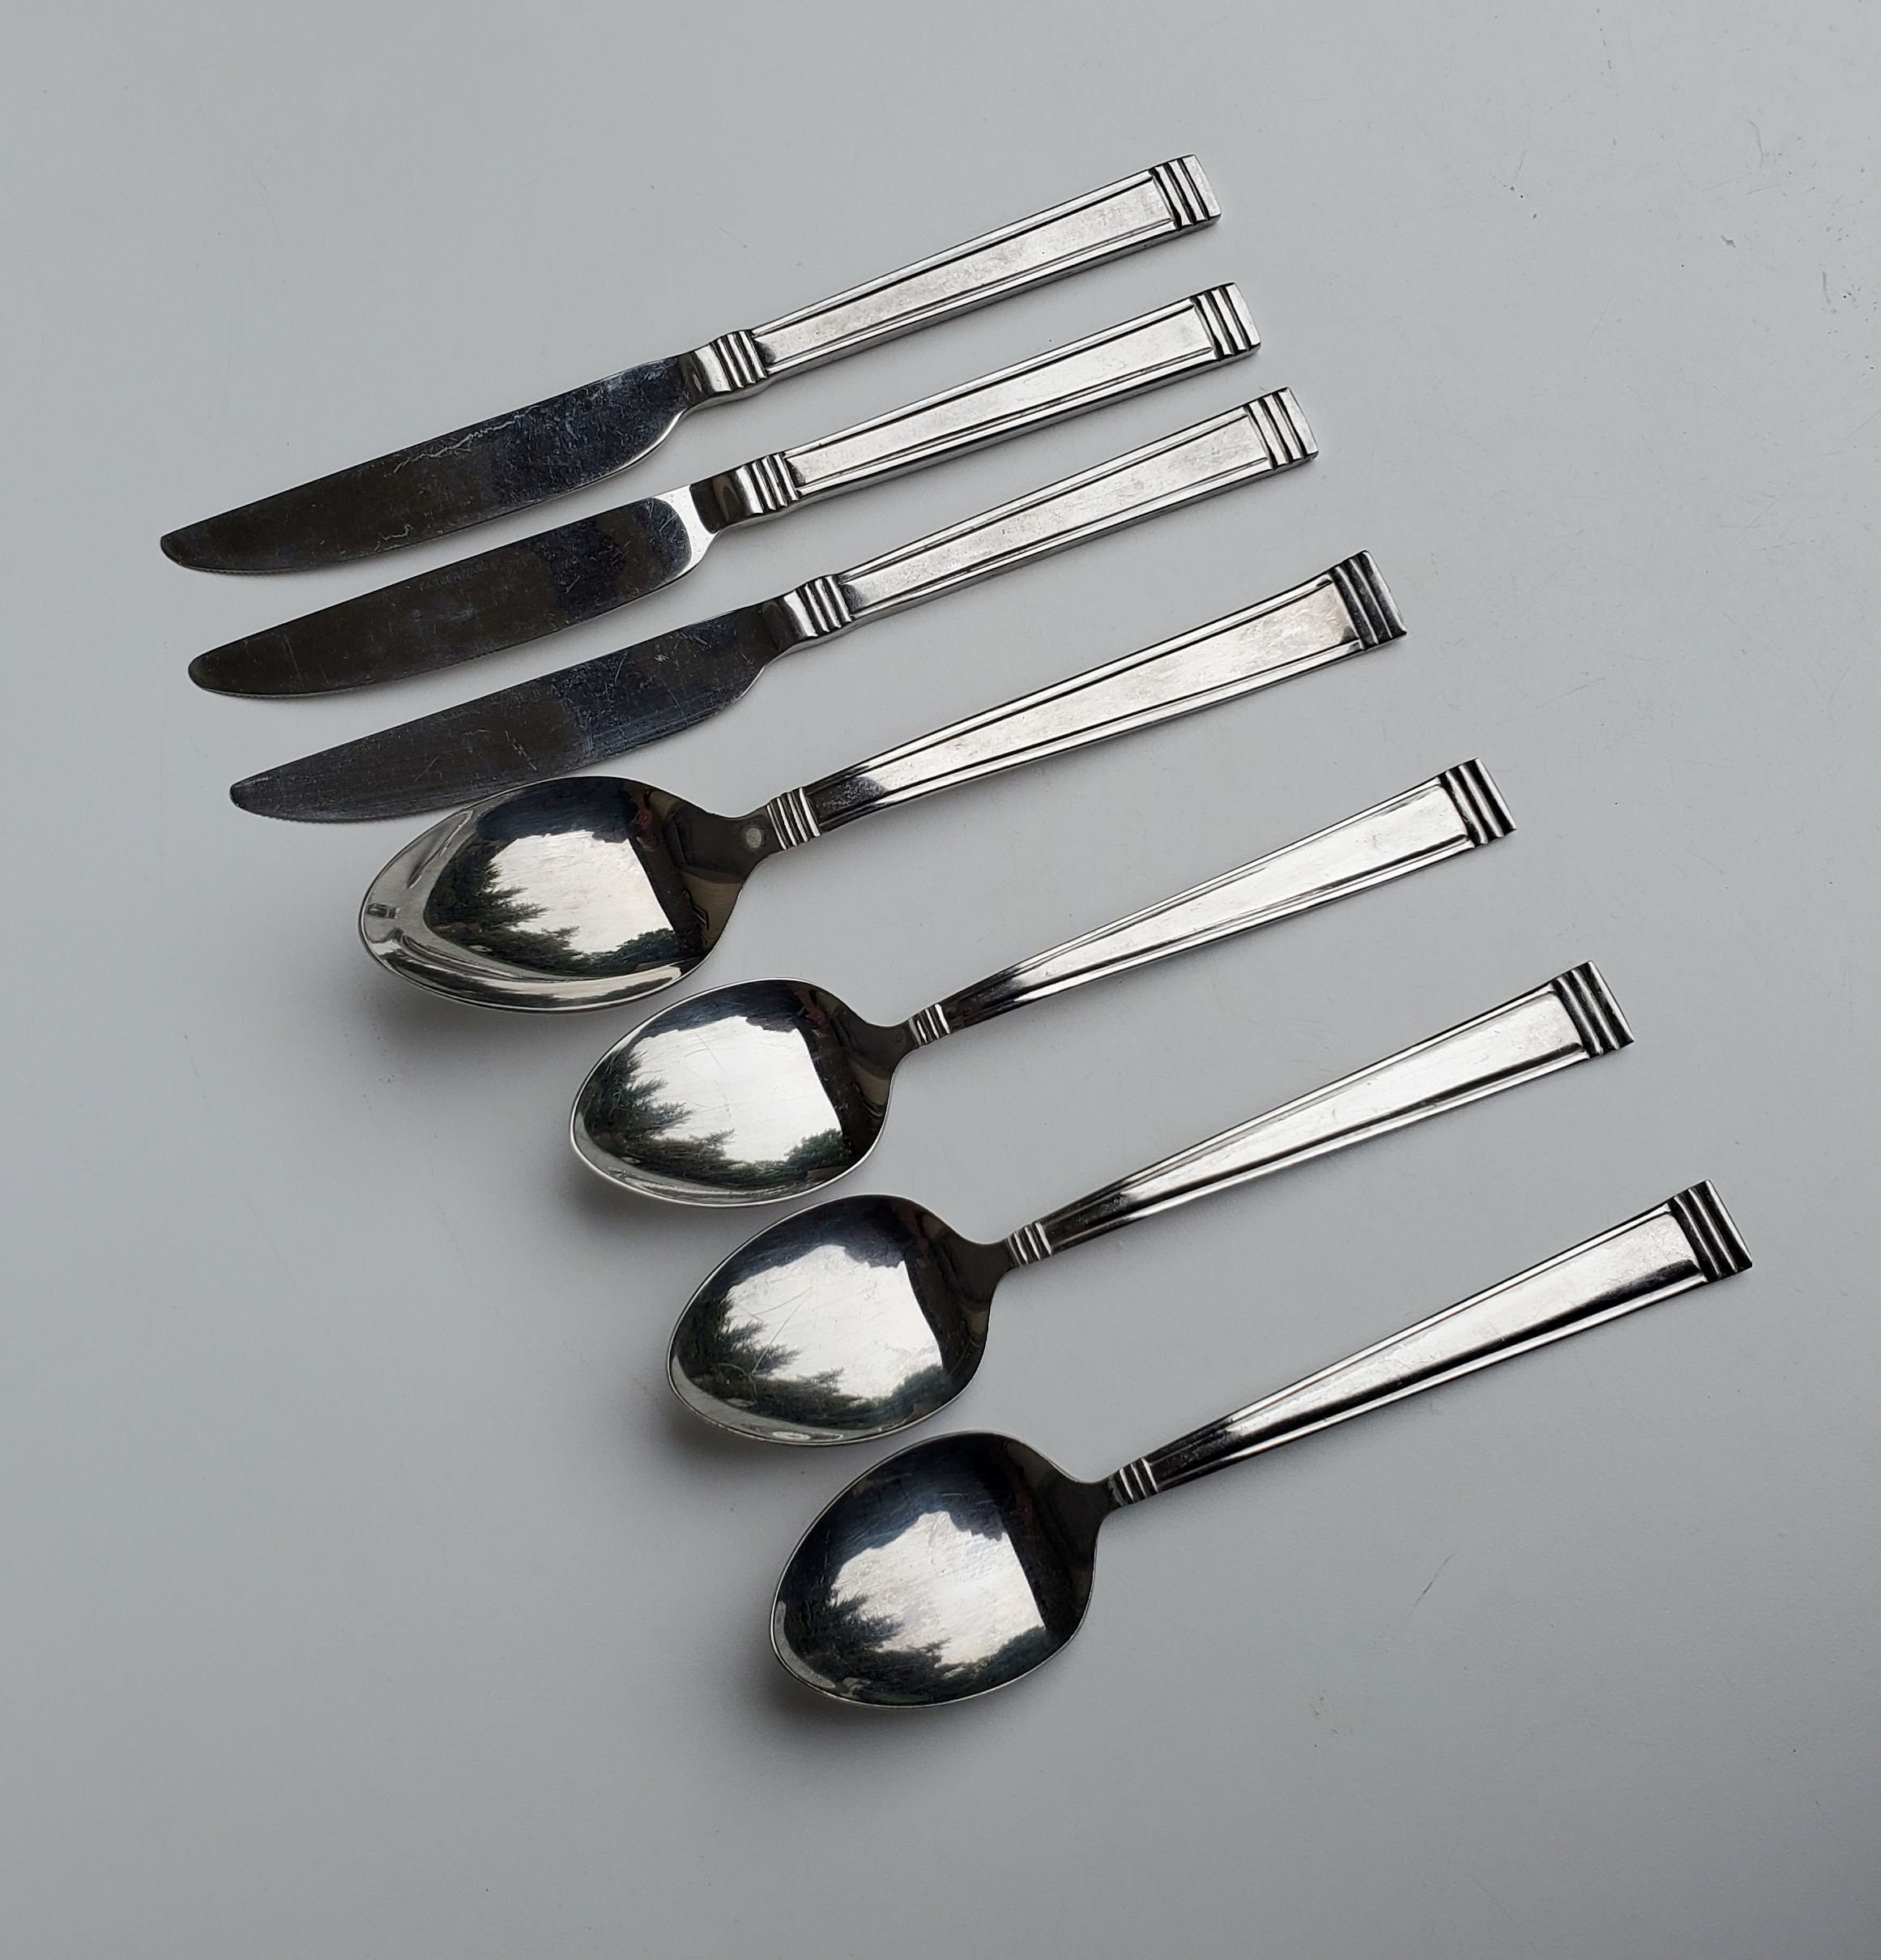 Farberware Classic 22-piece Stamped Stainless Steel Cutlery and Utensil Set